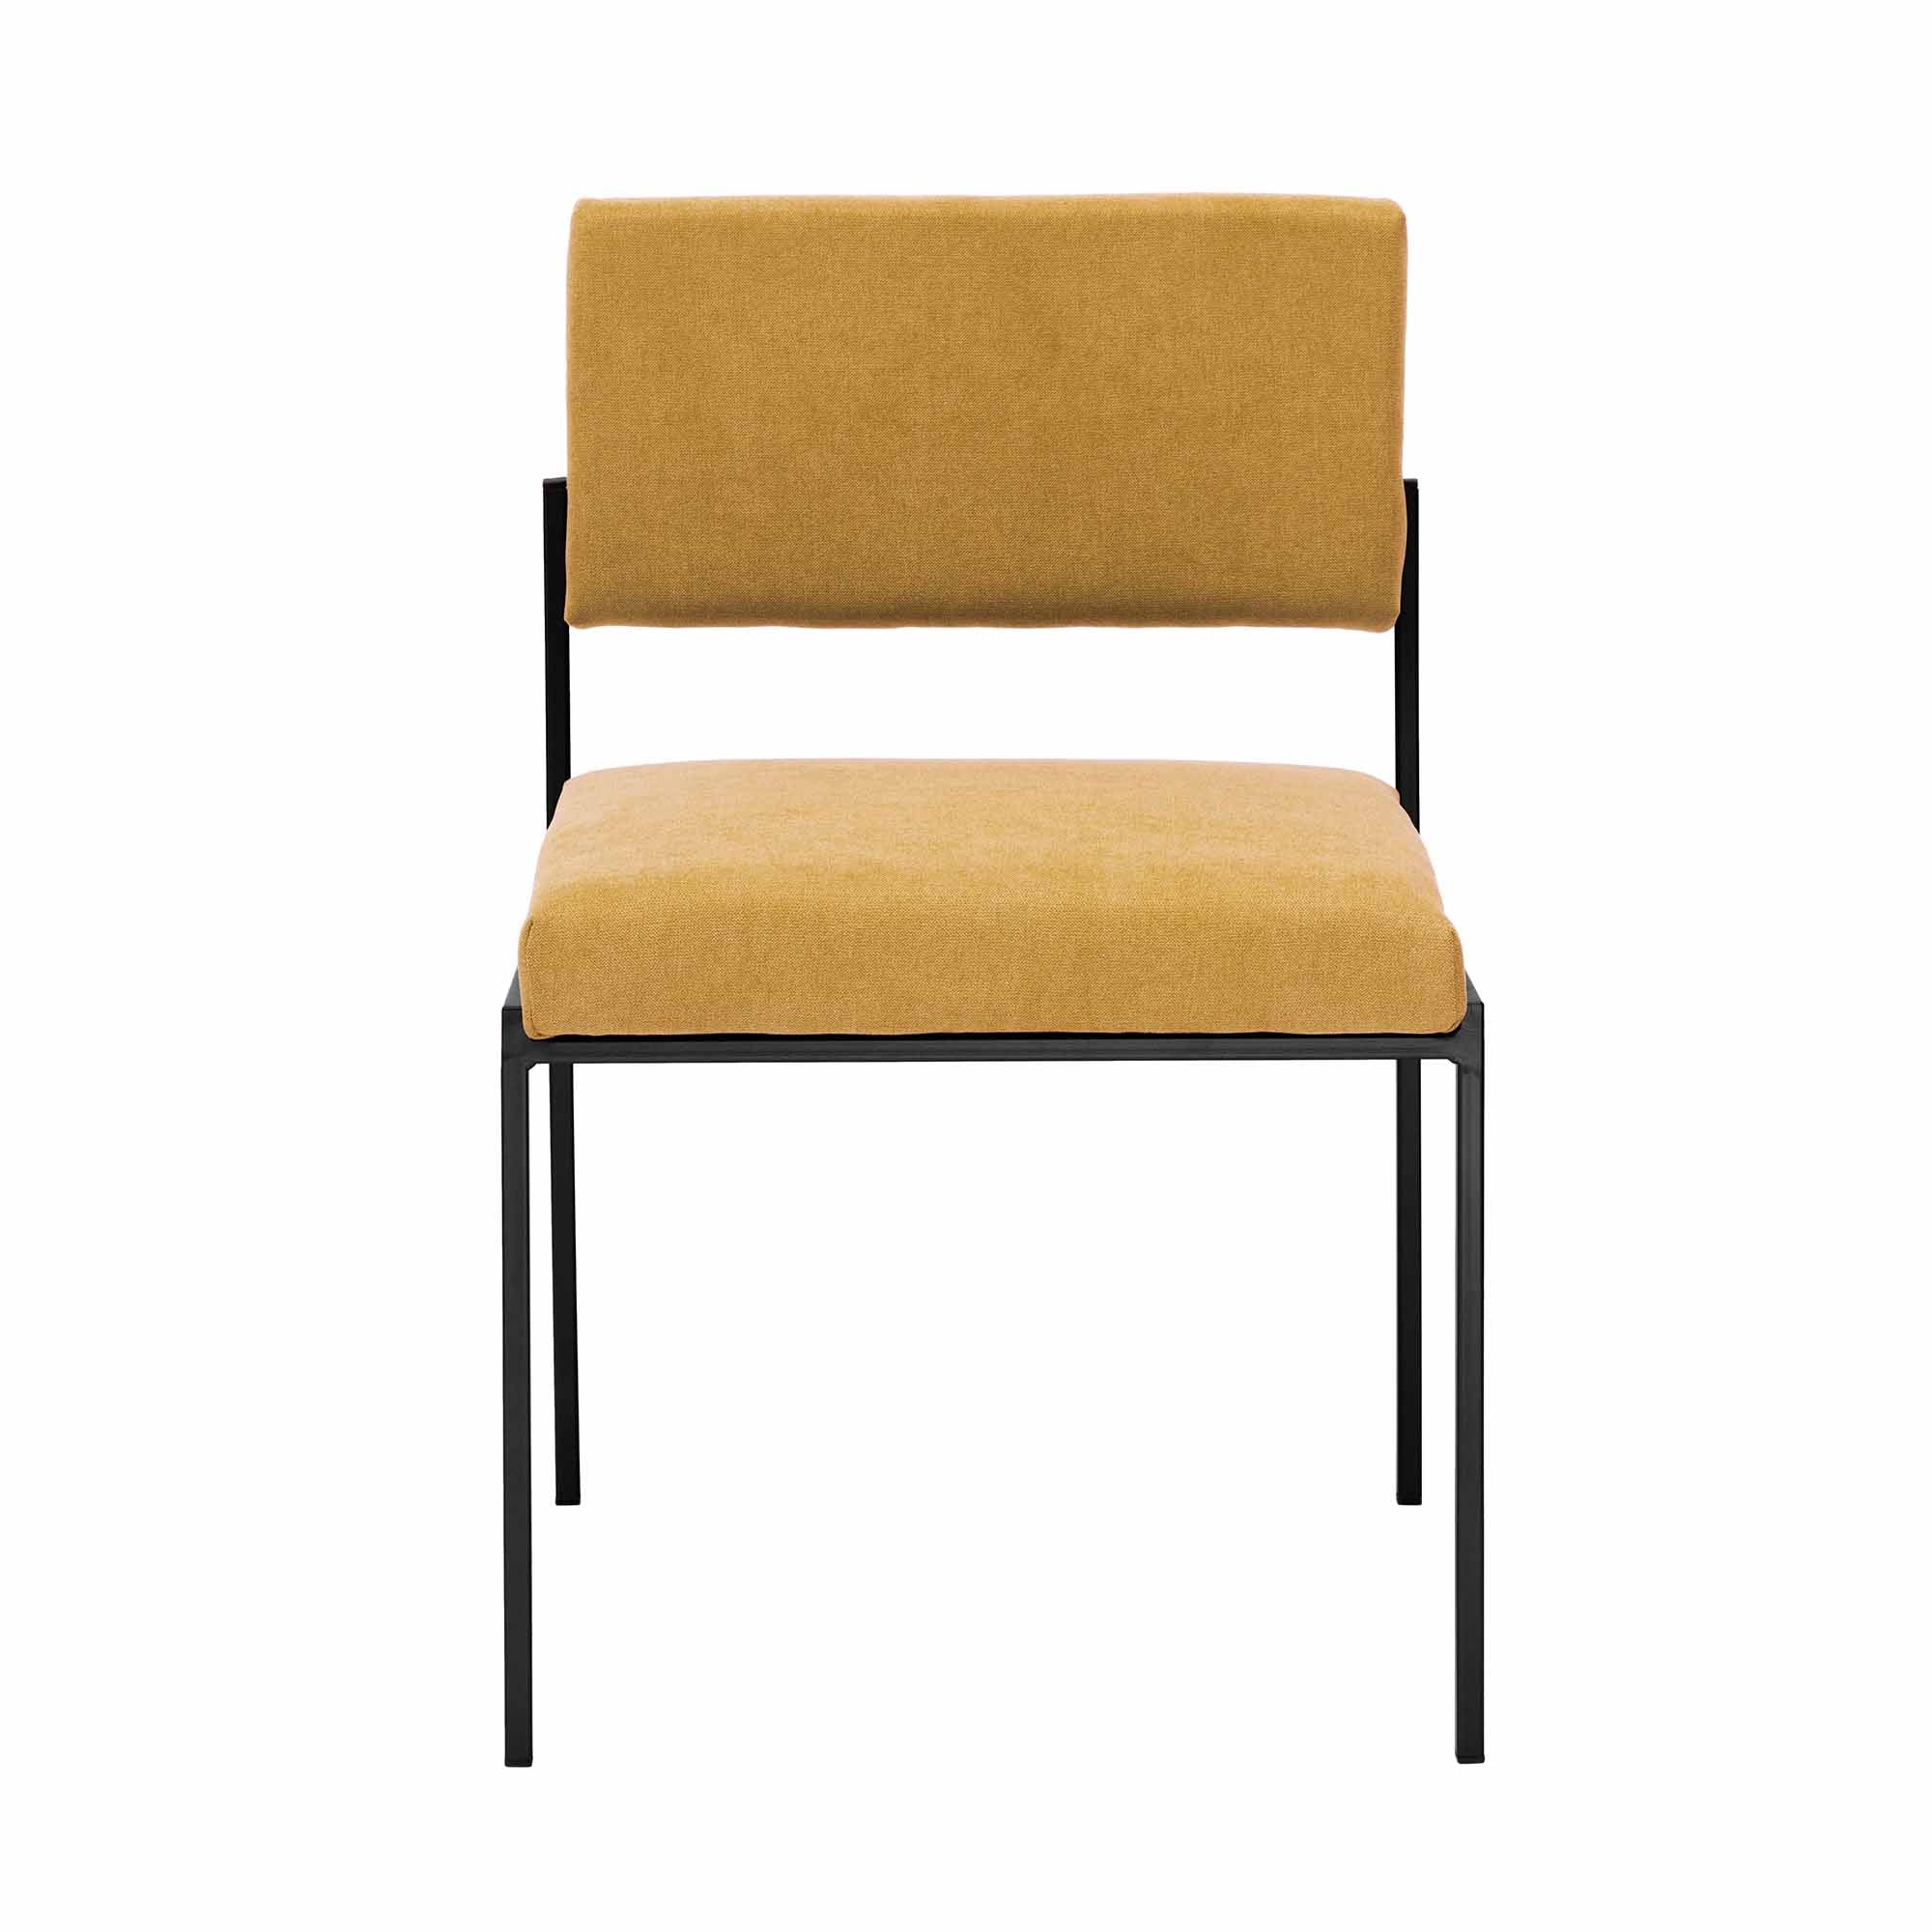  Chair, Powder-Coated Steel Frame, front view yellow fabric, black frame